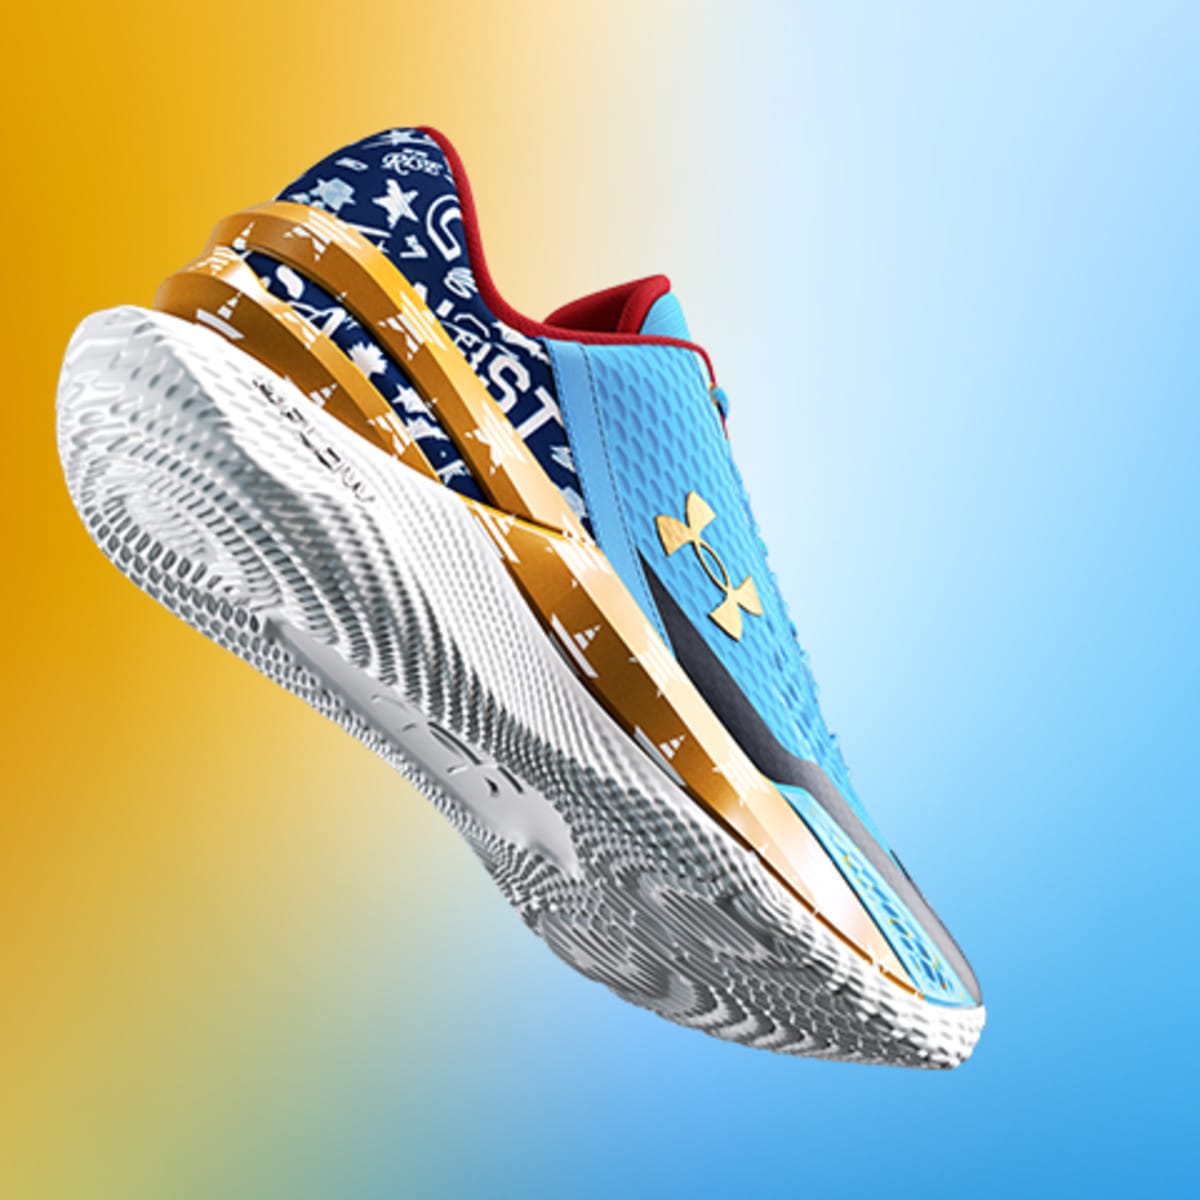 Curry 2 FloTro 'All-Star' - Sports FanNation Kicks News, Analysis and More